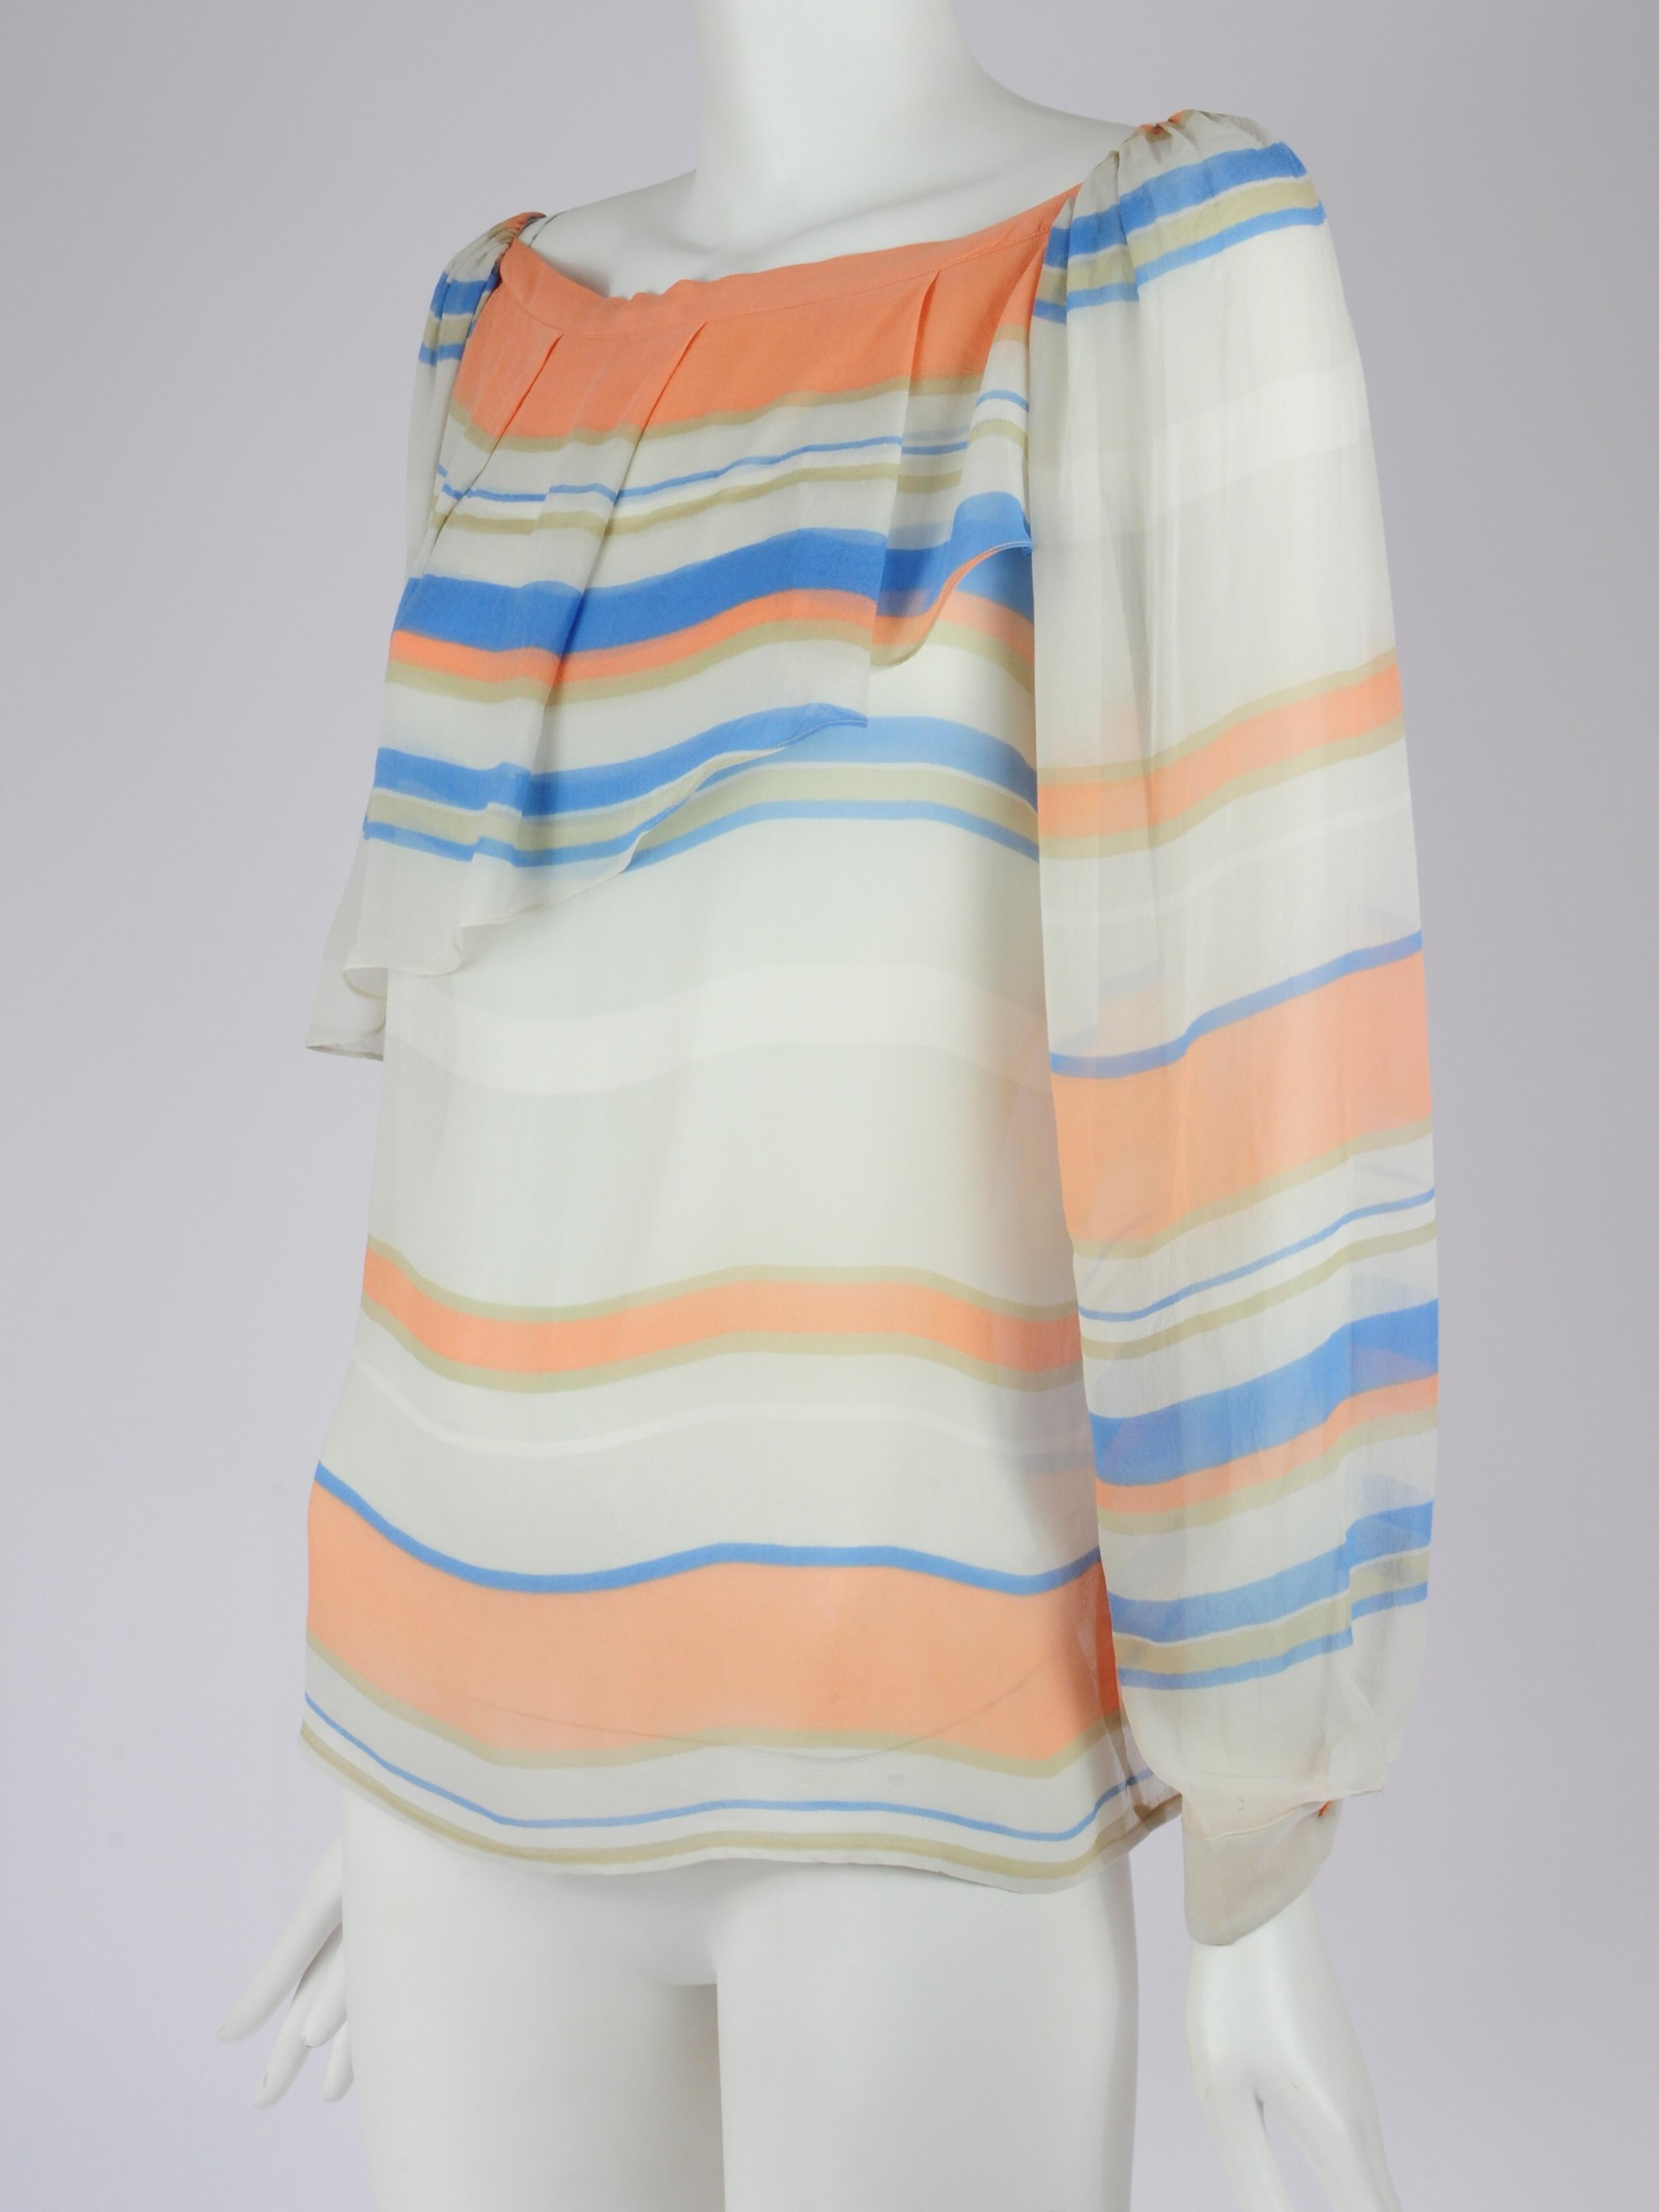 Christian Dior Silk Striped Blouse with Volant Detail by Marc Bohan 1970s For Sale 5